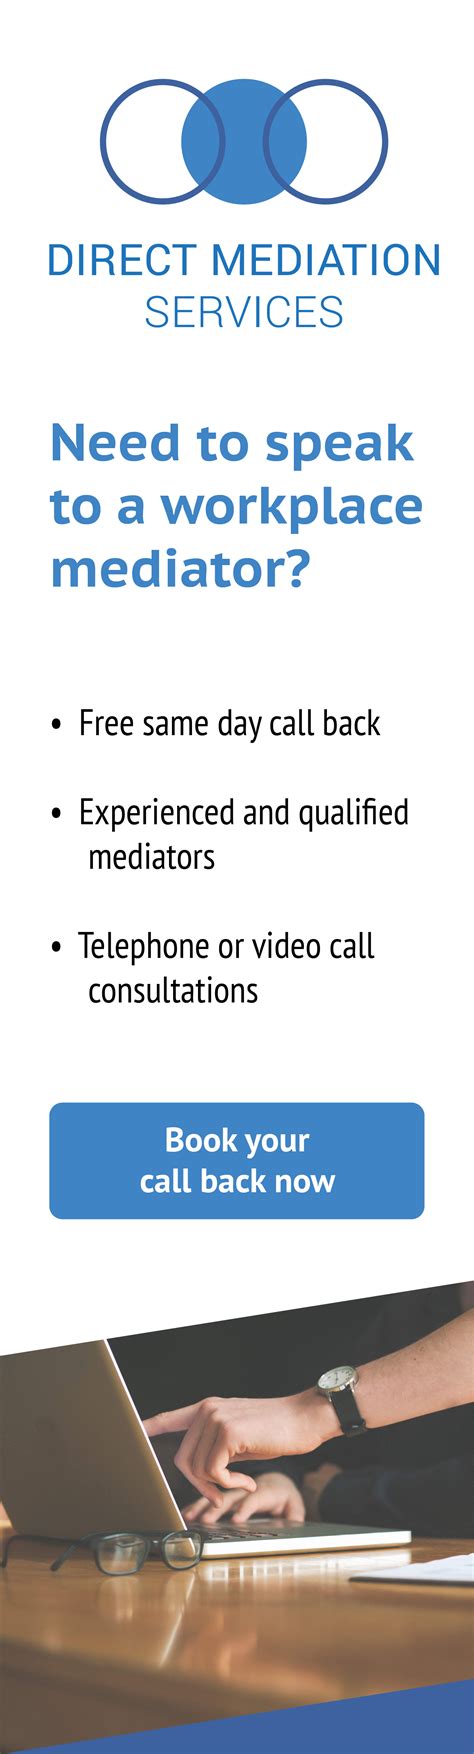 Direct Mediation Services